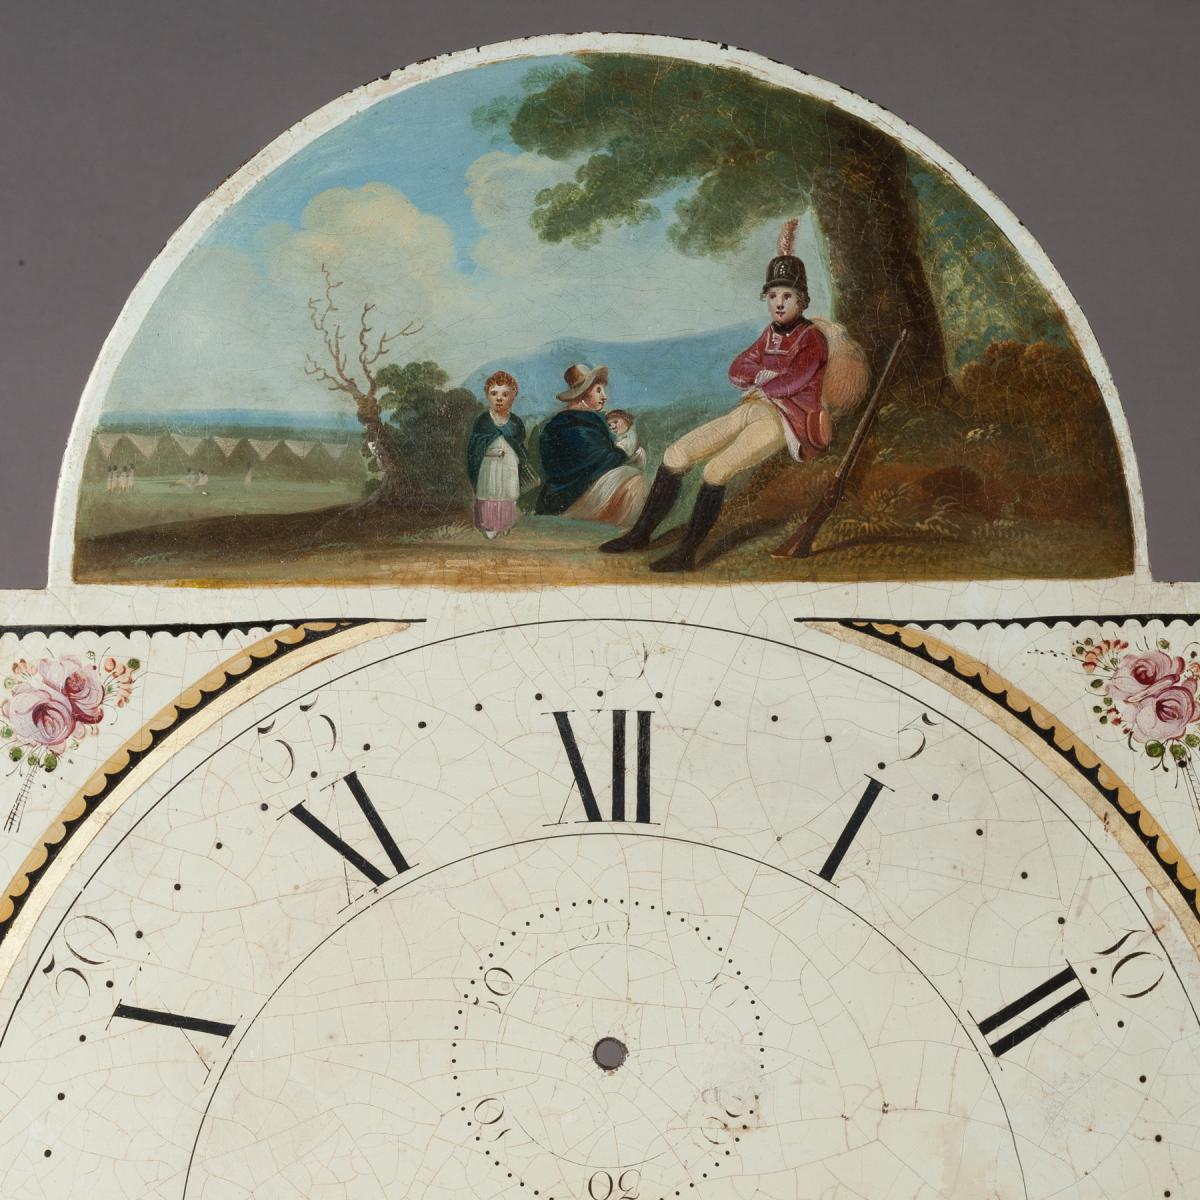 Northumberland Fusilier Clock Face